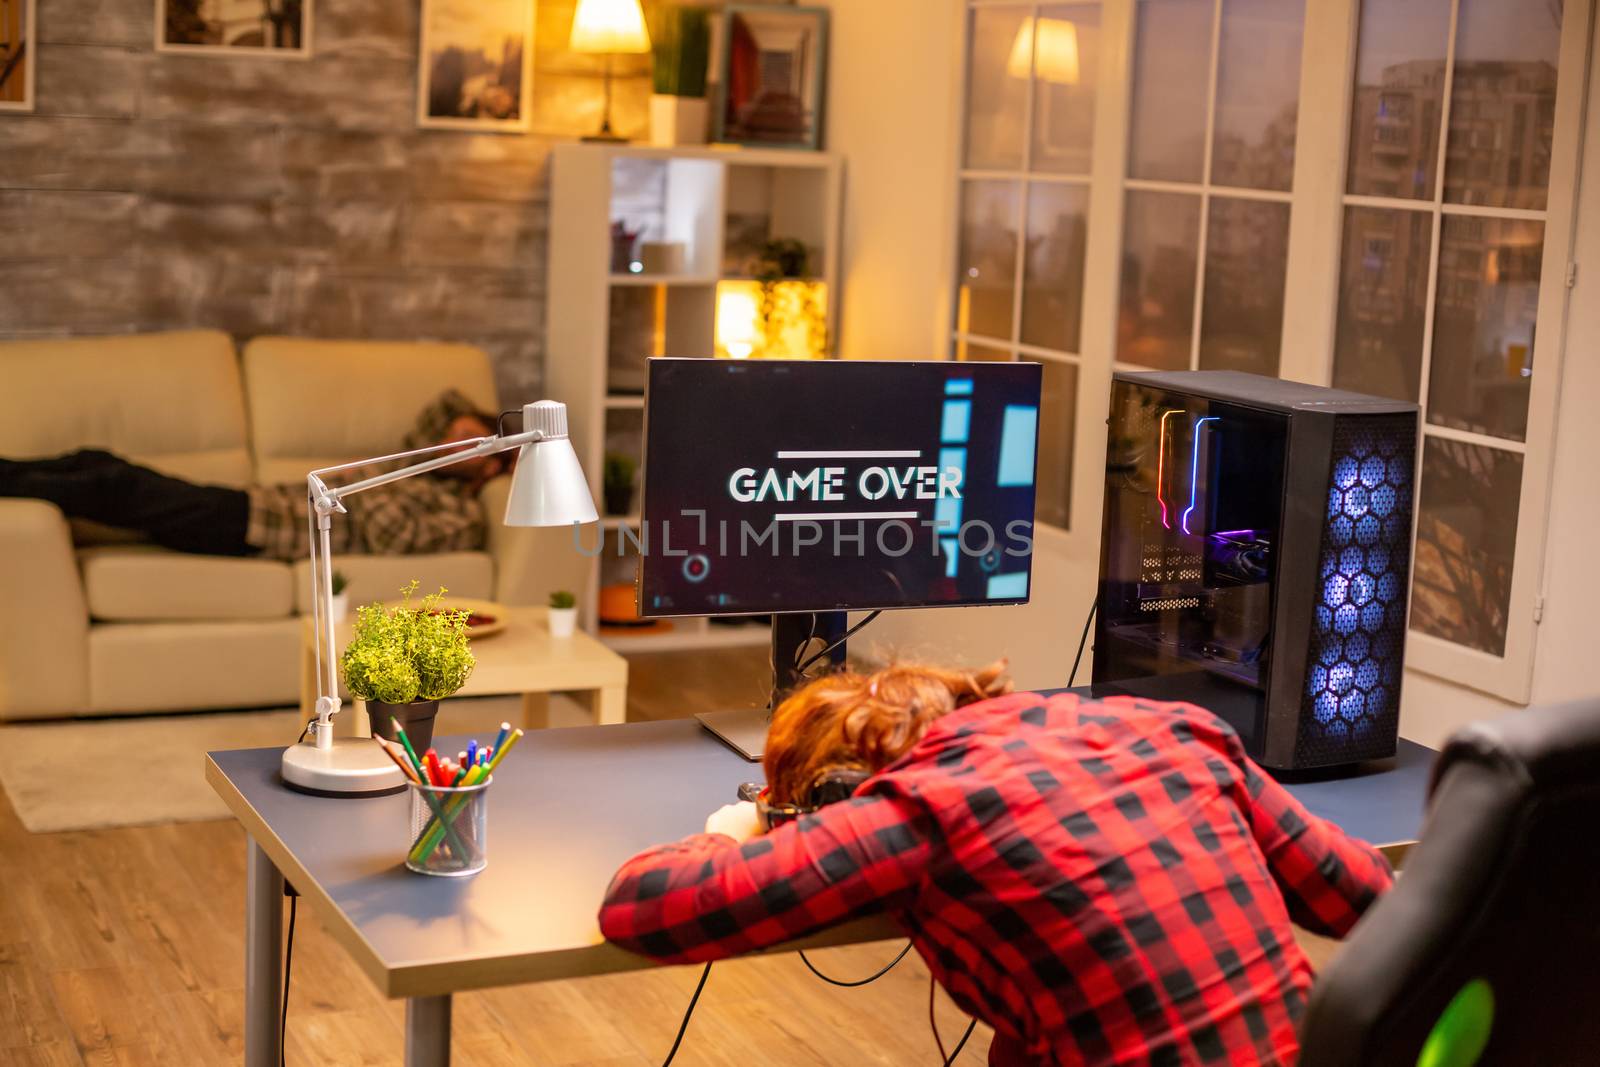 Gamer woman losing at a video game playing late at night in the living room.